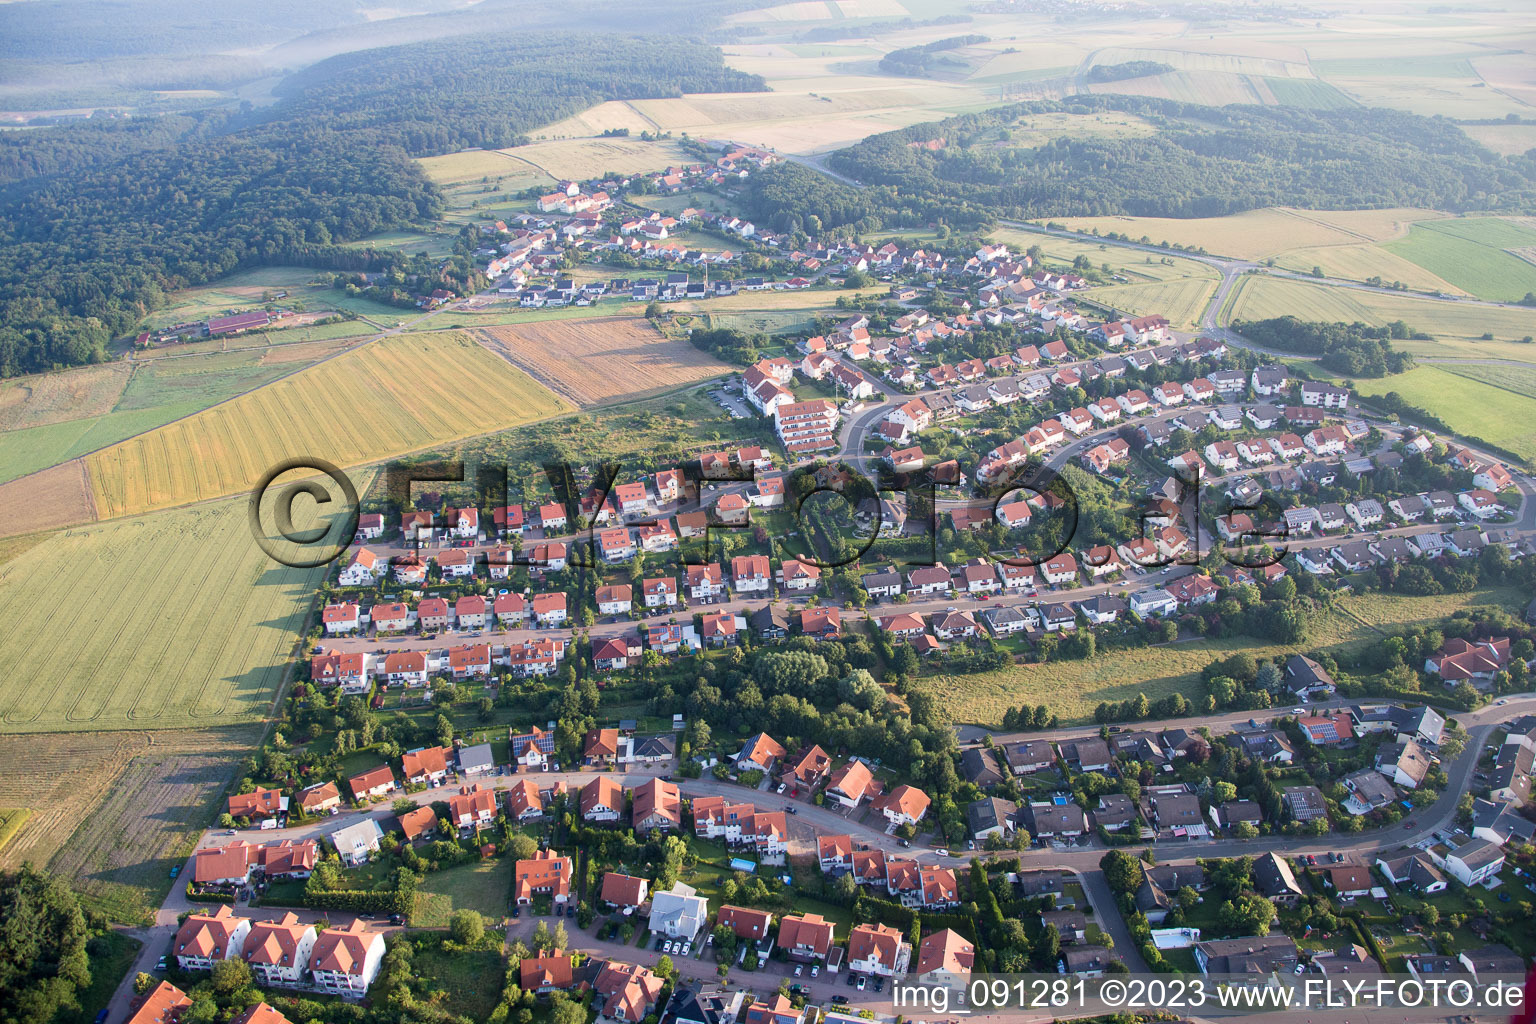 Aerial view of Haide in the state Rhineland-Palatinate, Germany